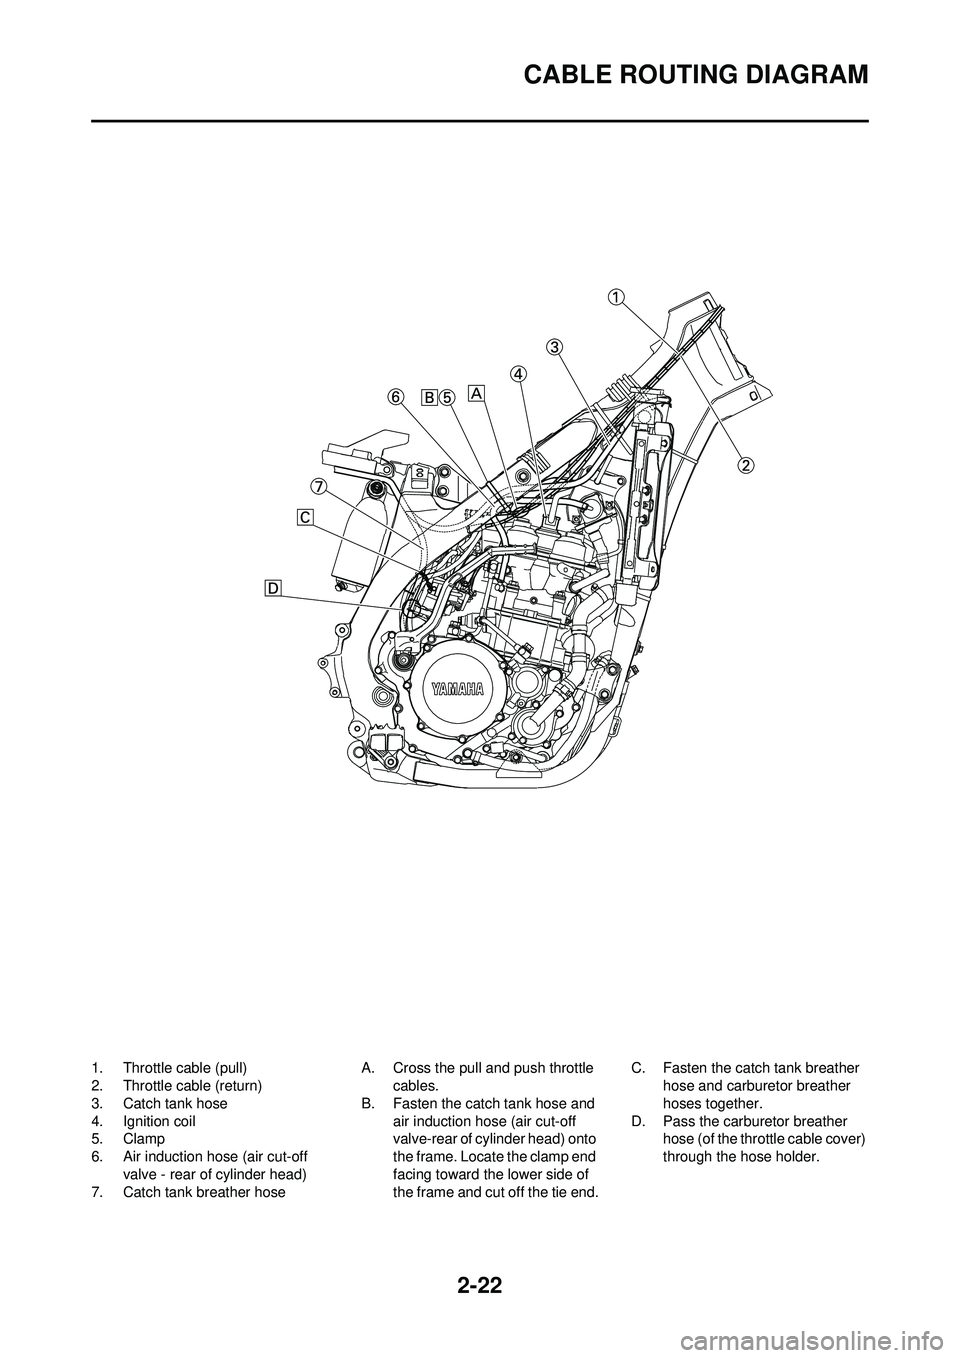 YAMAHA WR 250F 2009  Owners Manual 2-22
CABLE ROUTING DIAGRAM
1. Throttle cable (pull)
2. Throttle cable (return)
3. Catch tank hose
4. Ignition coil
5. Clamp
6. Air induction hose (air cut-off valve - rear of cylinder head)
7. Catch t